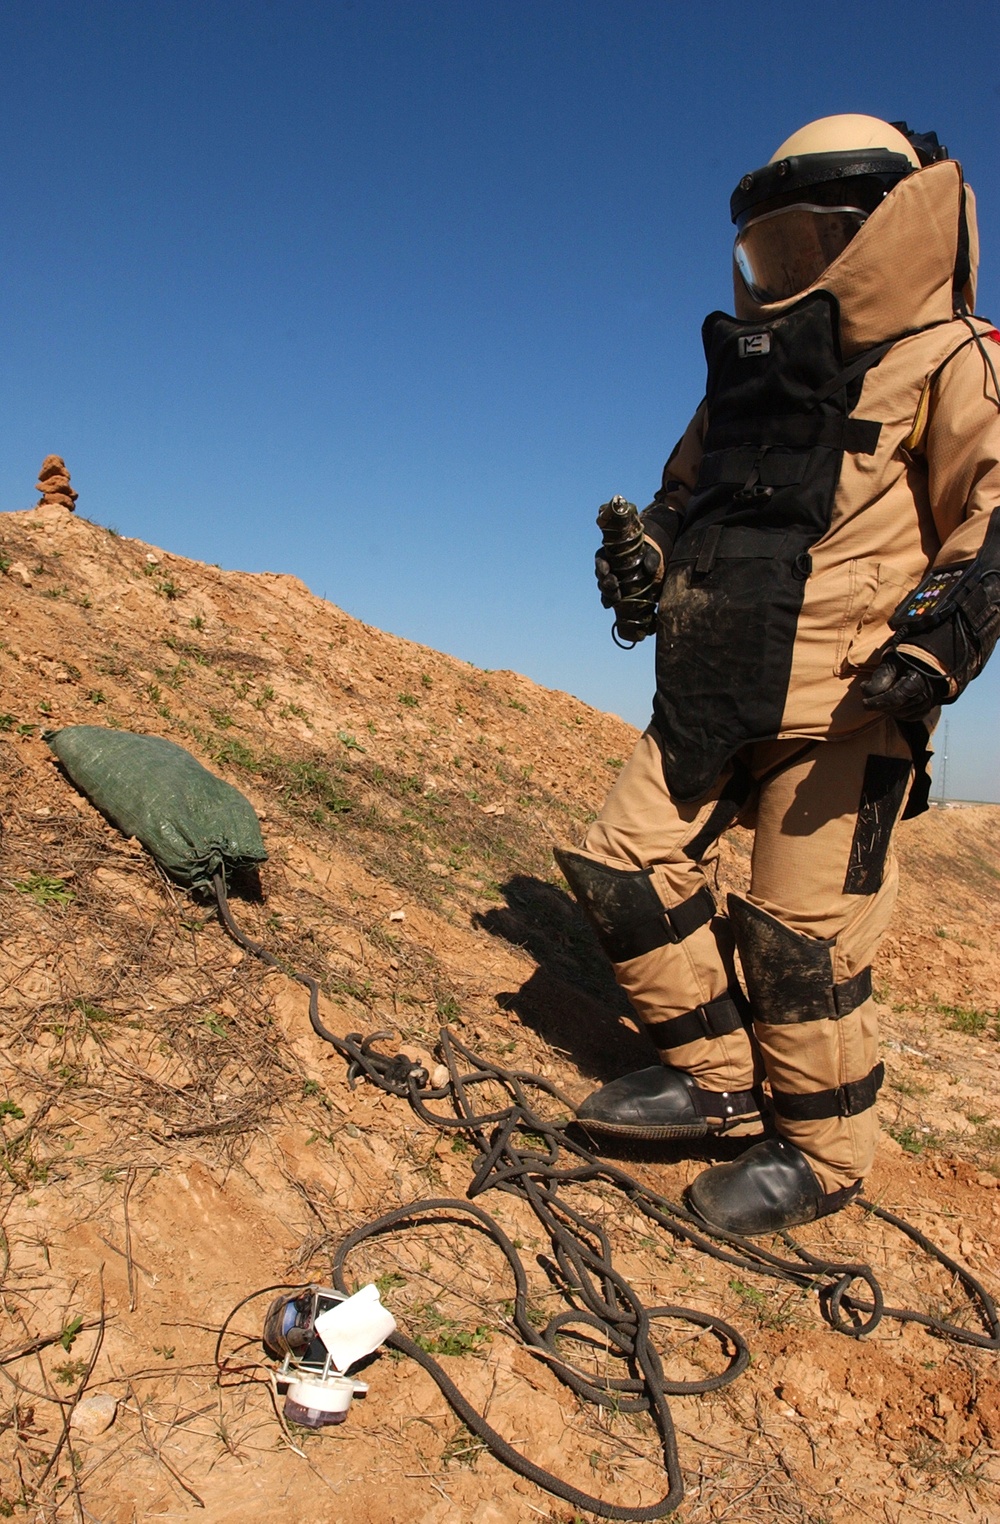 SSG Wills recovers a Motorola radio after disarming an improvised explosive